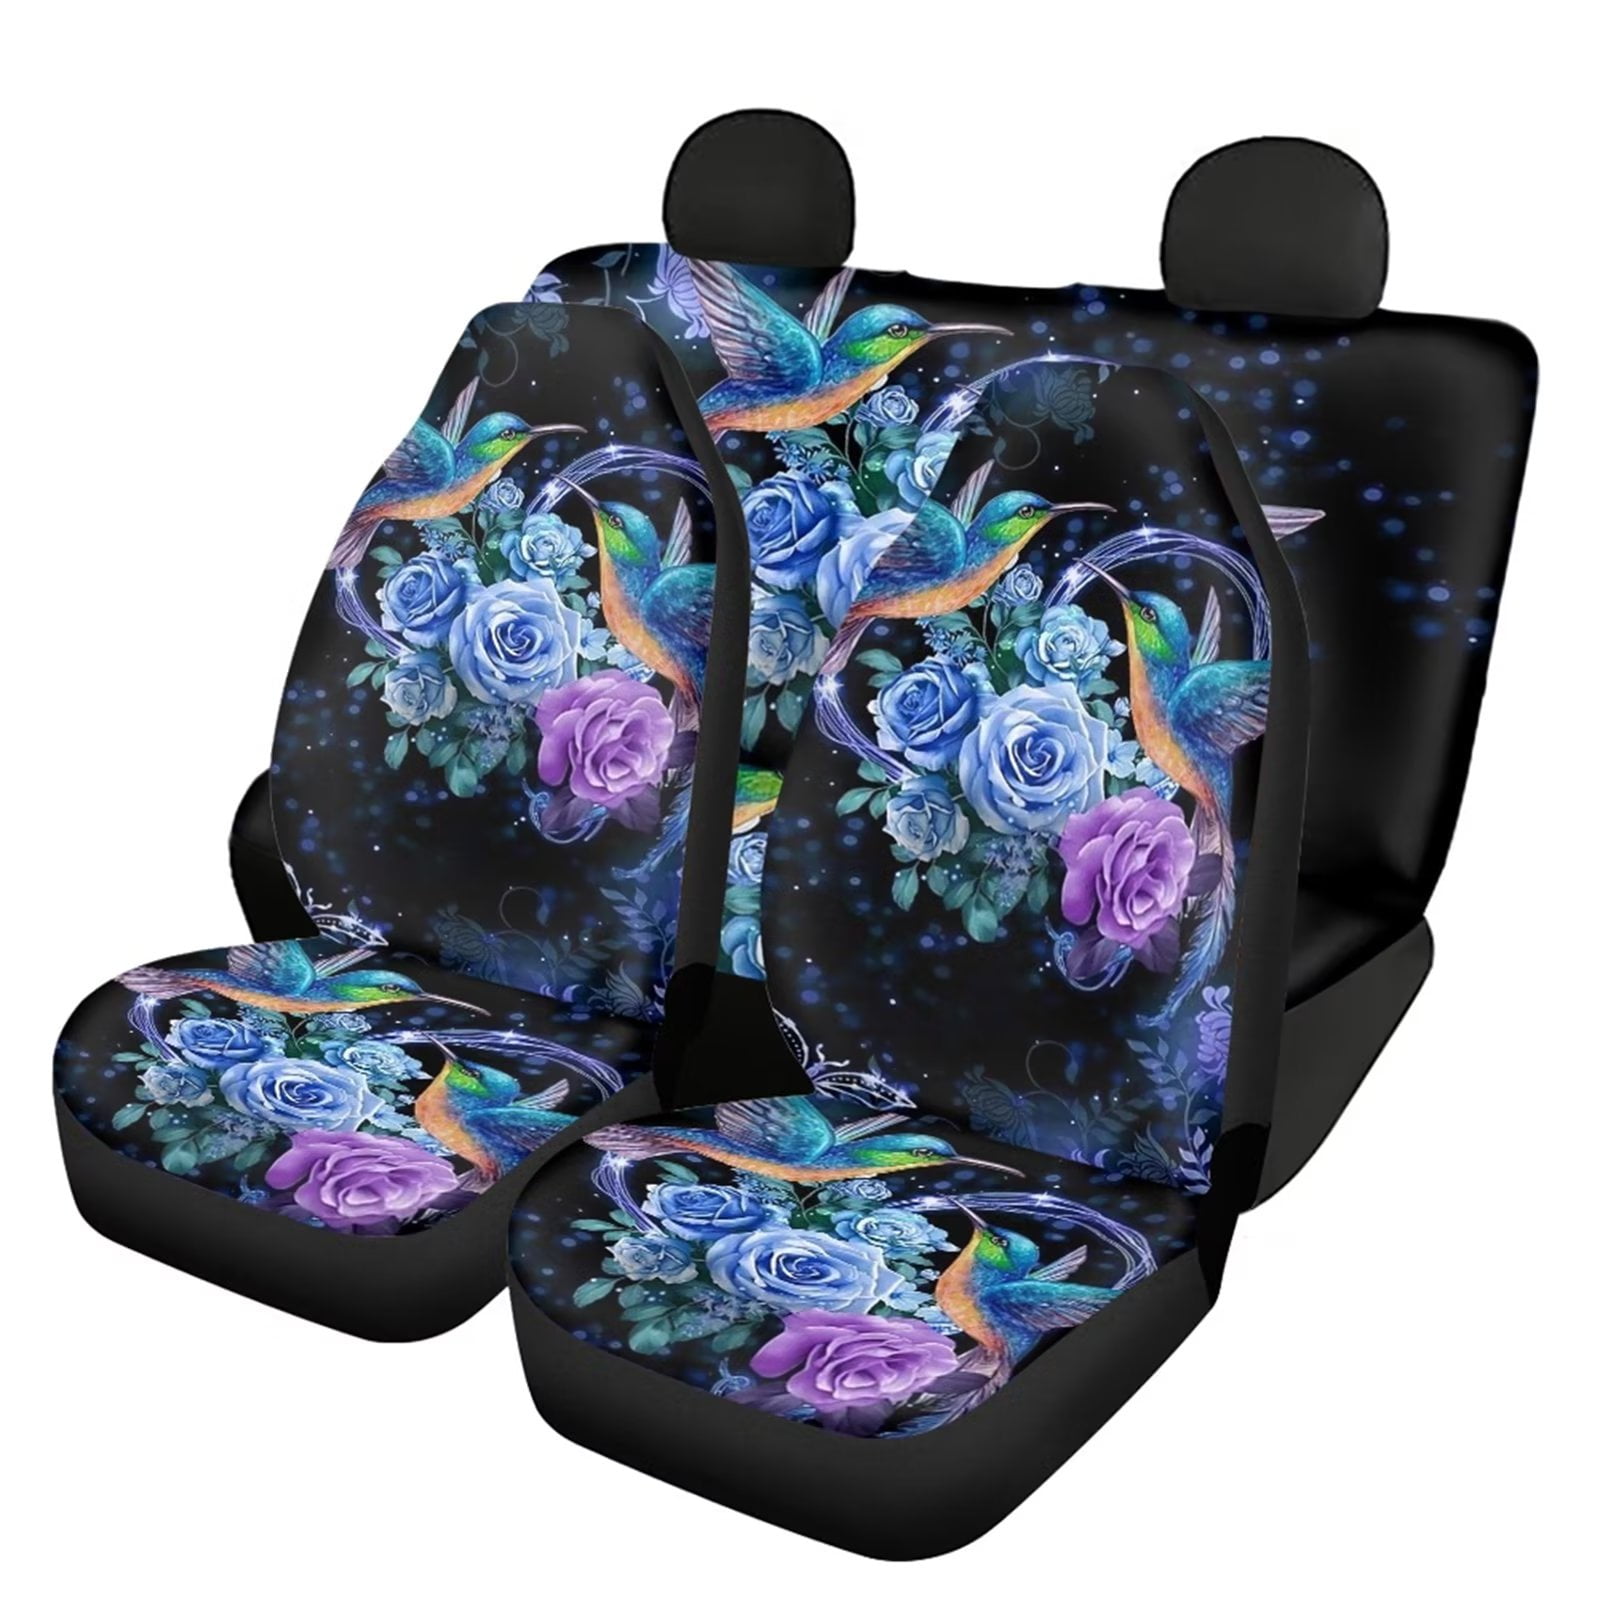 FKELYI Purple Rose Floral Front Car Seat Covers Decor Set of  2,Dustproof+Waterproof Front Saddle Blanket Cushion Backrest  Peotectors,Universal Fit for Almost Vehicle Cars,Women Men 